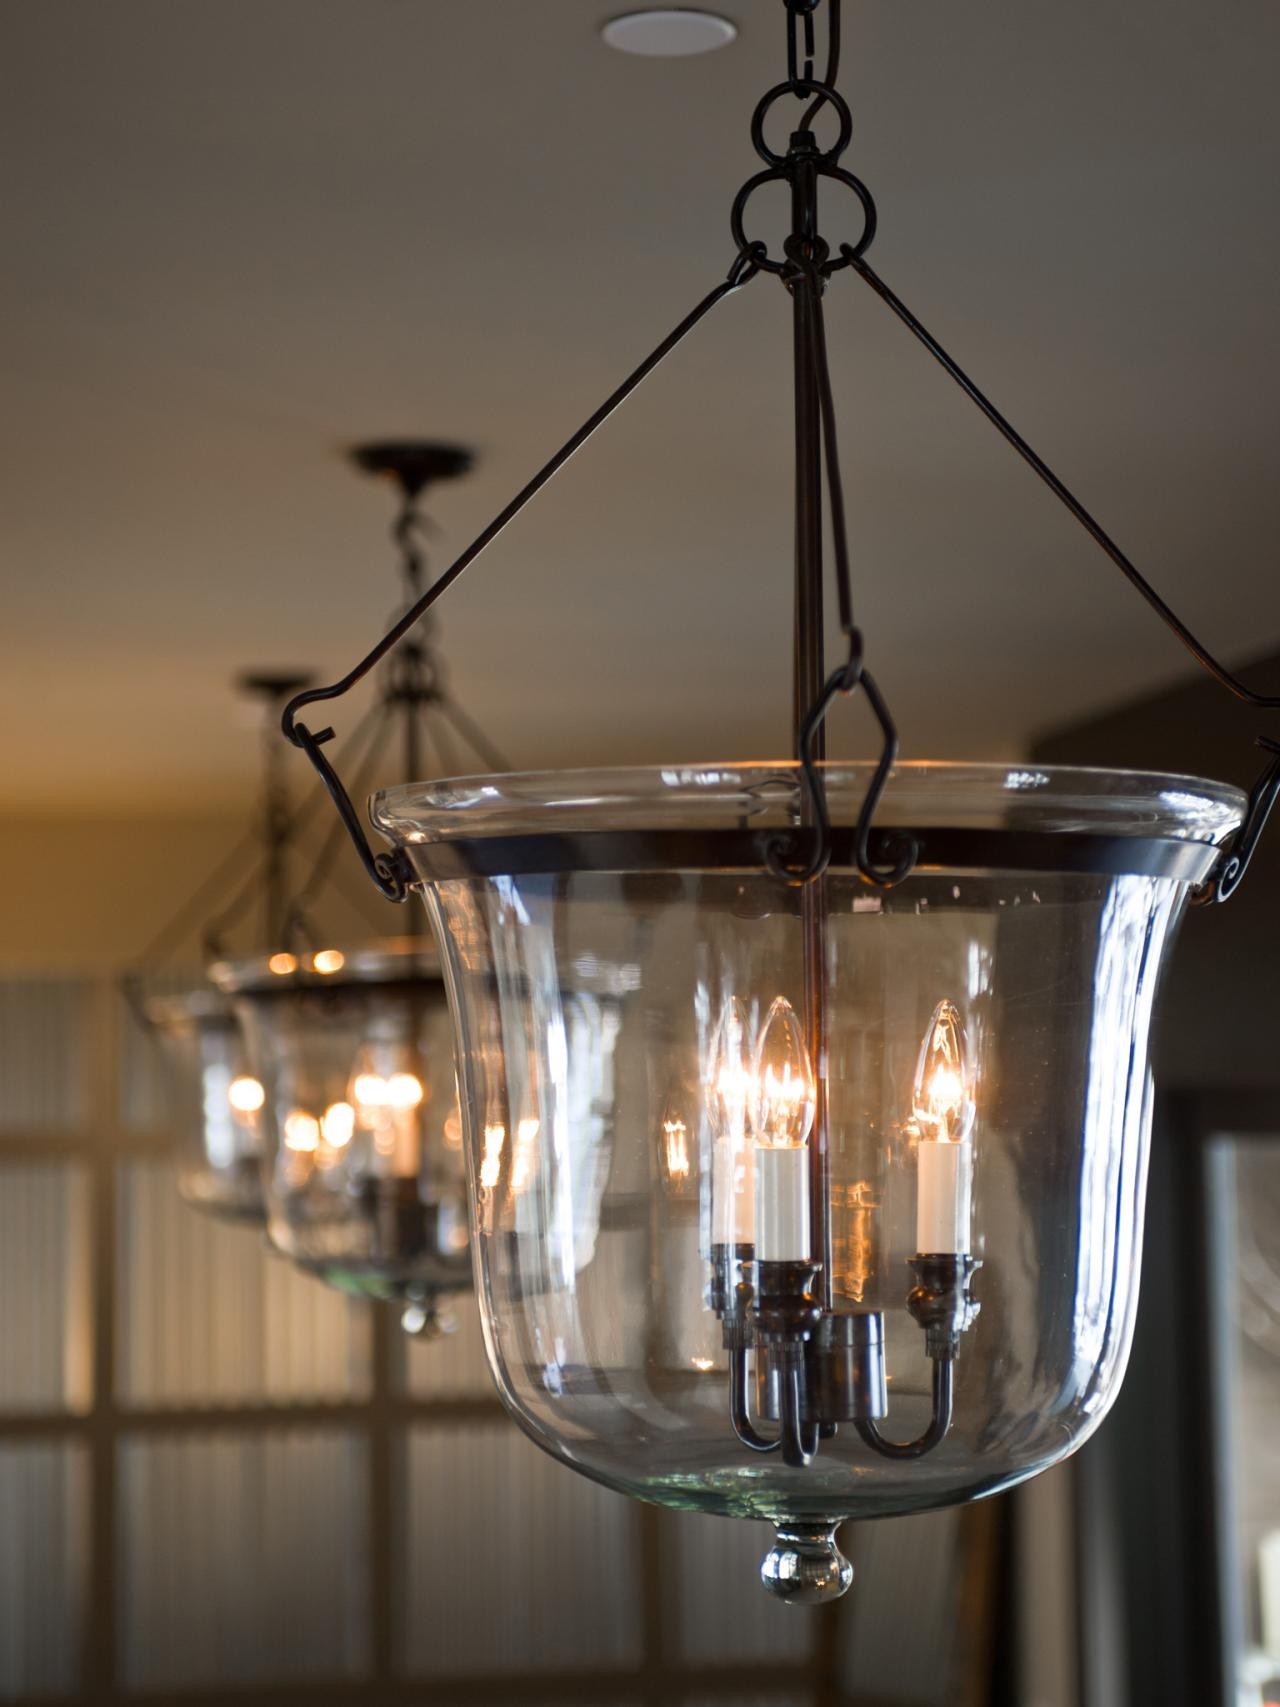 Ceiling lights add a touch of style to foyer hgtv